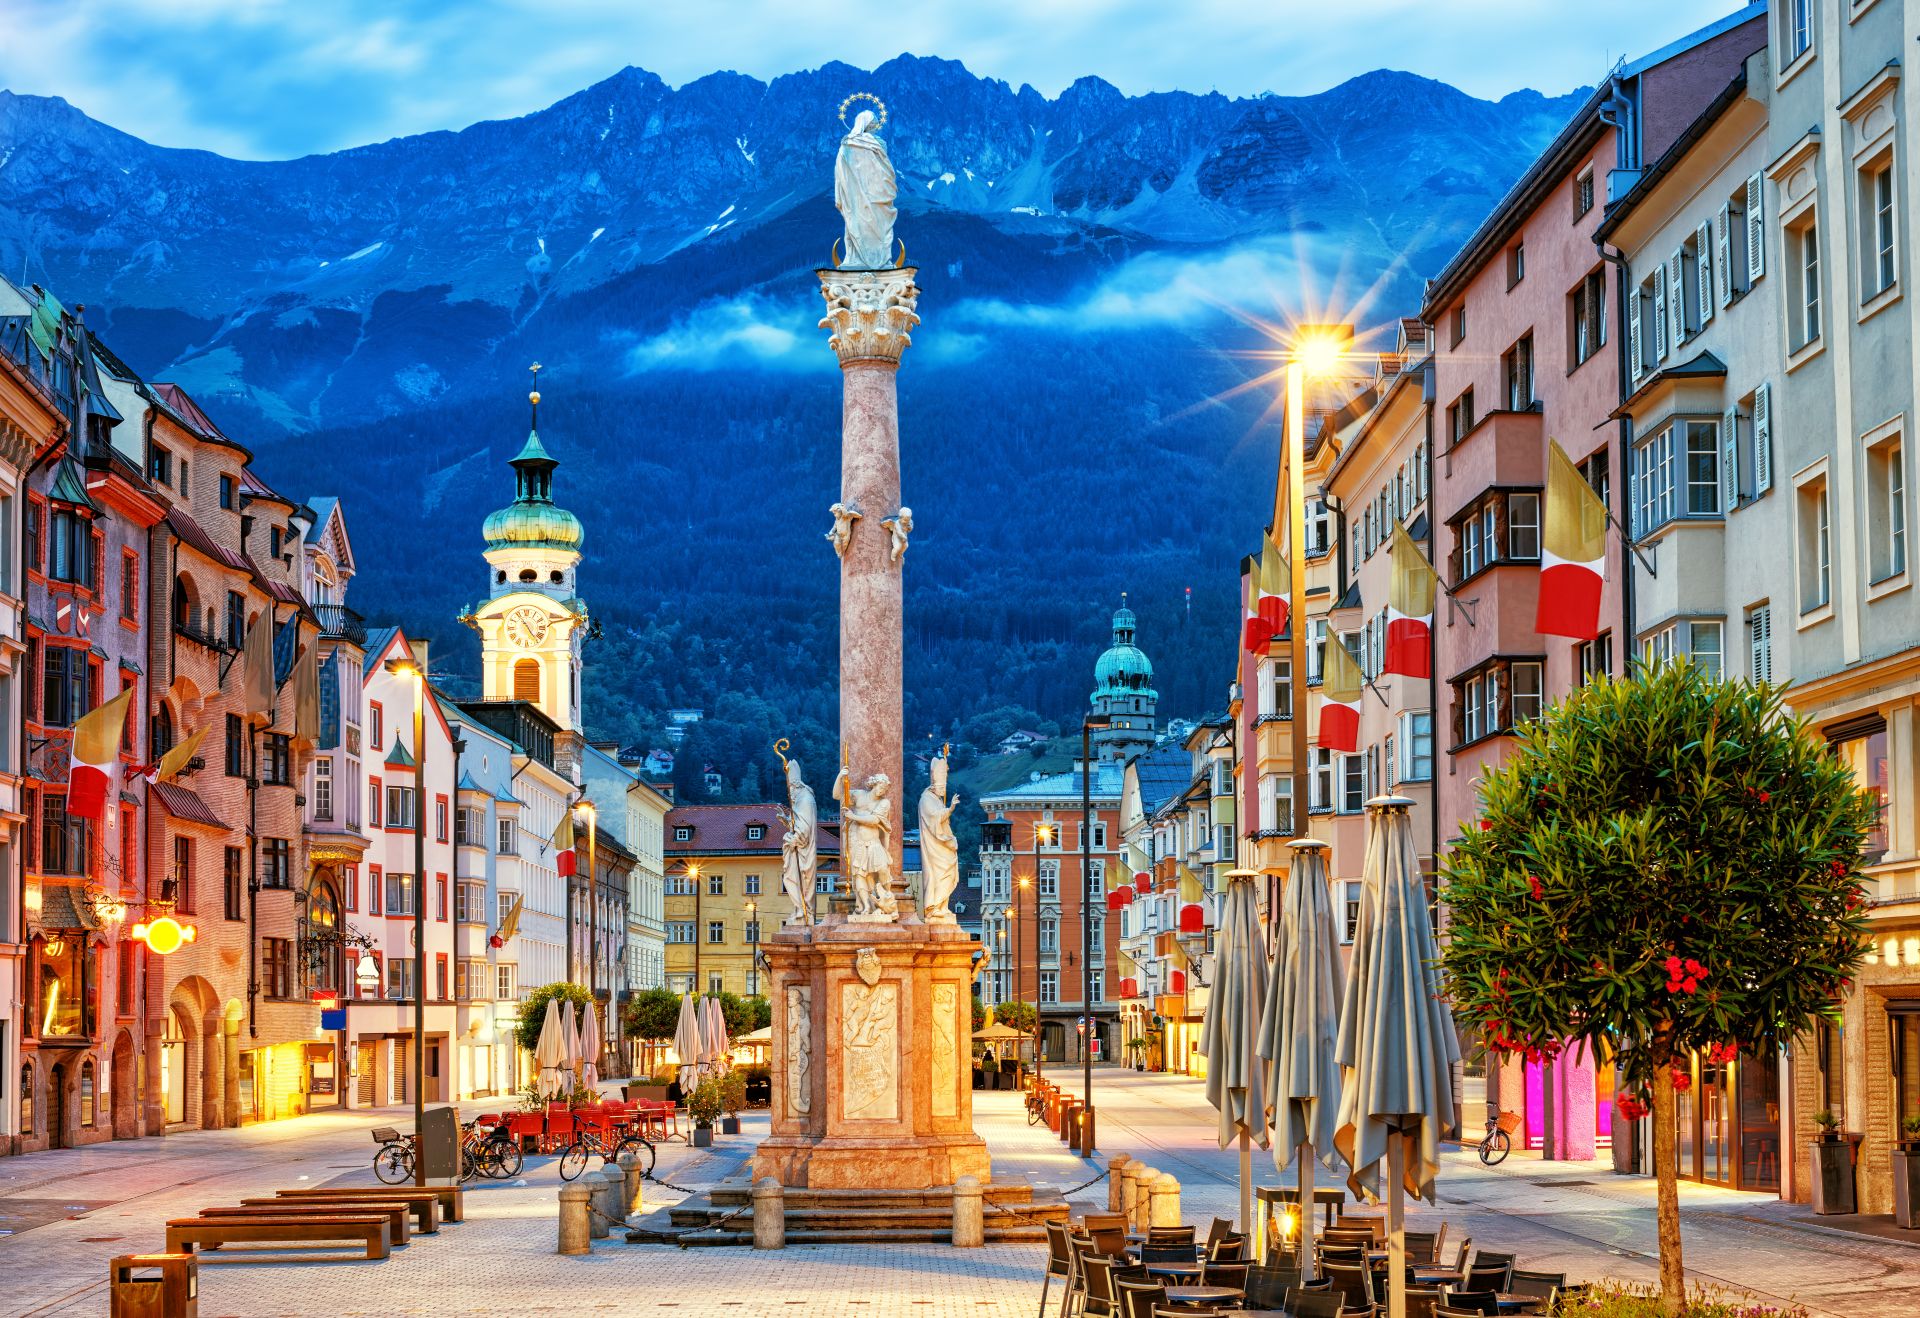 Innsbruck old town in the Alps mountains